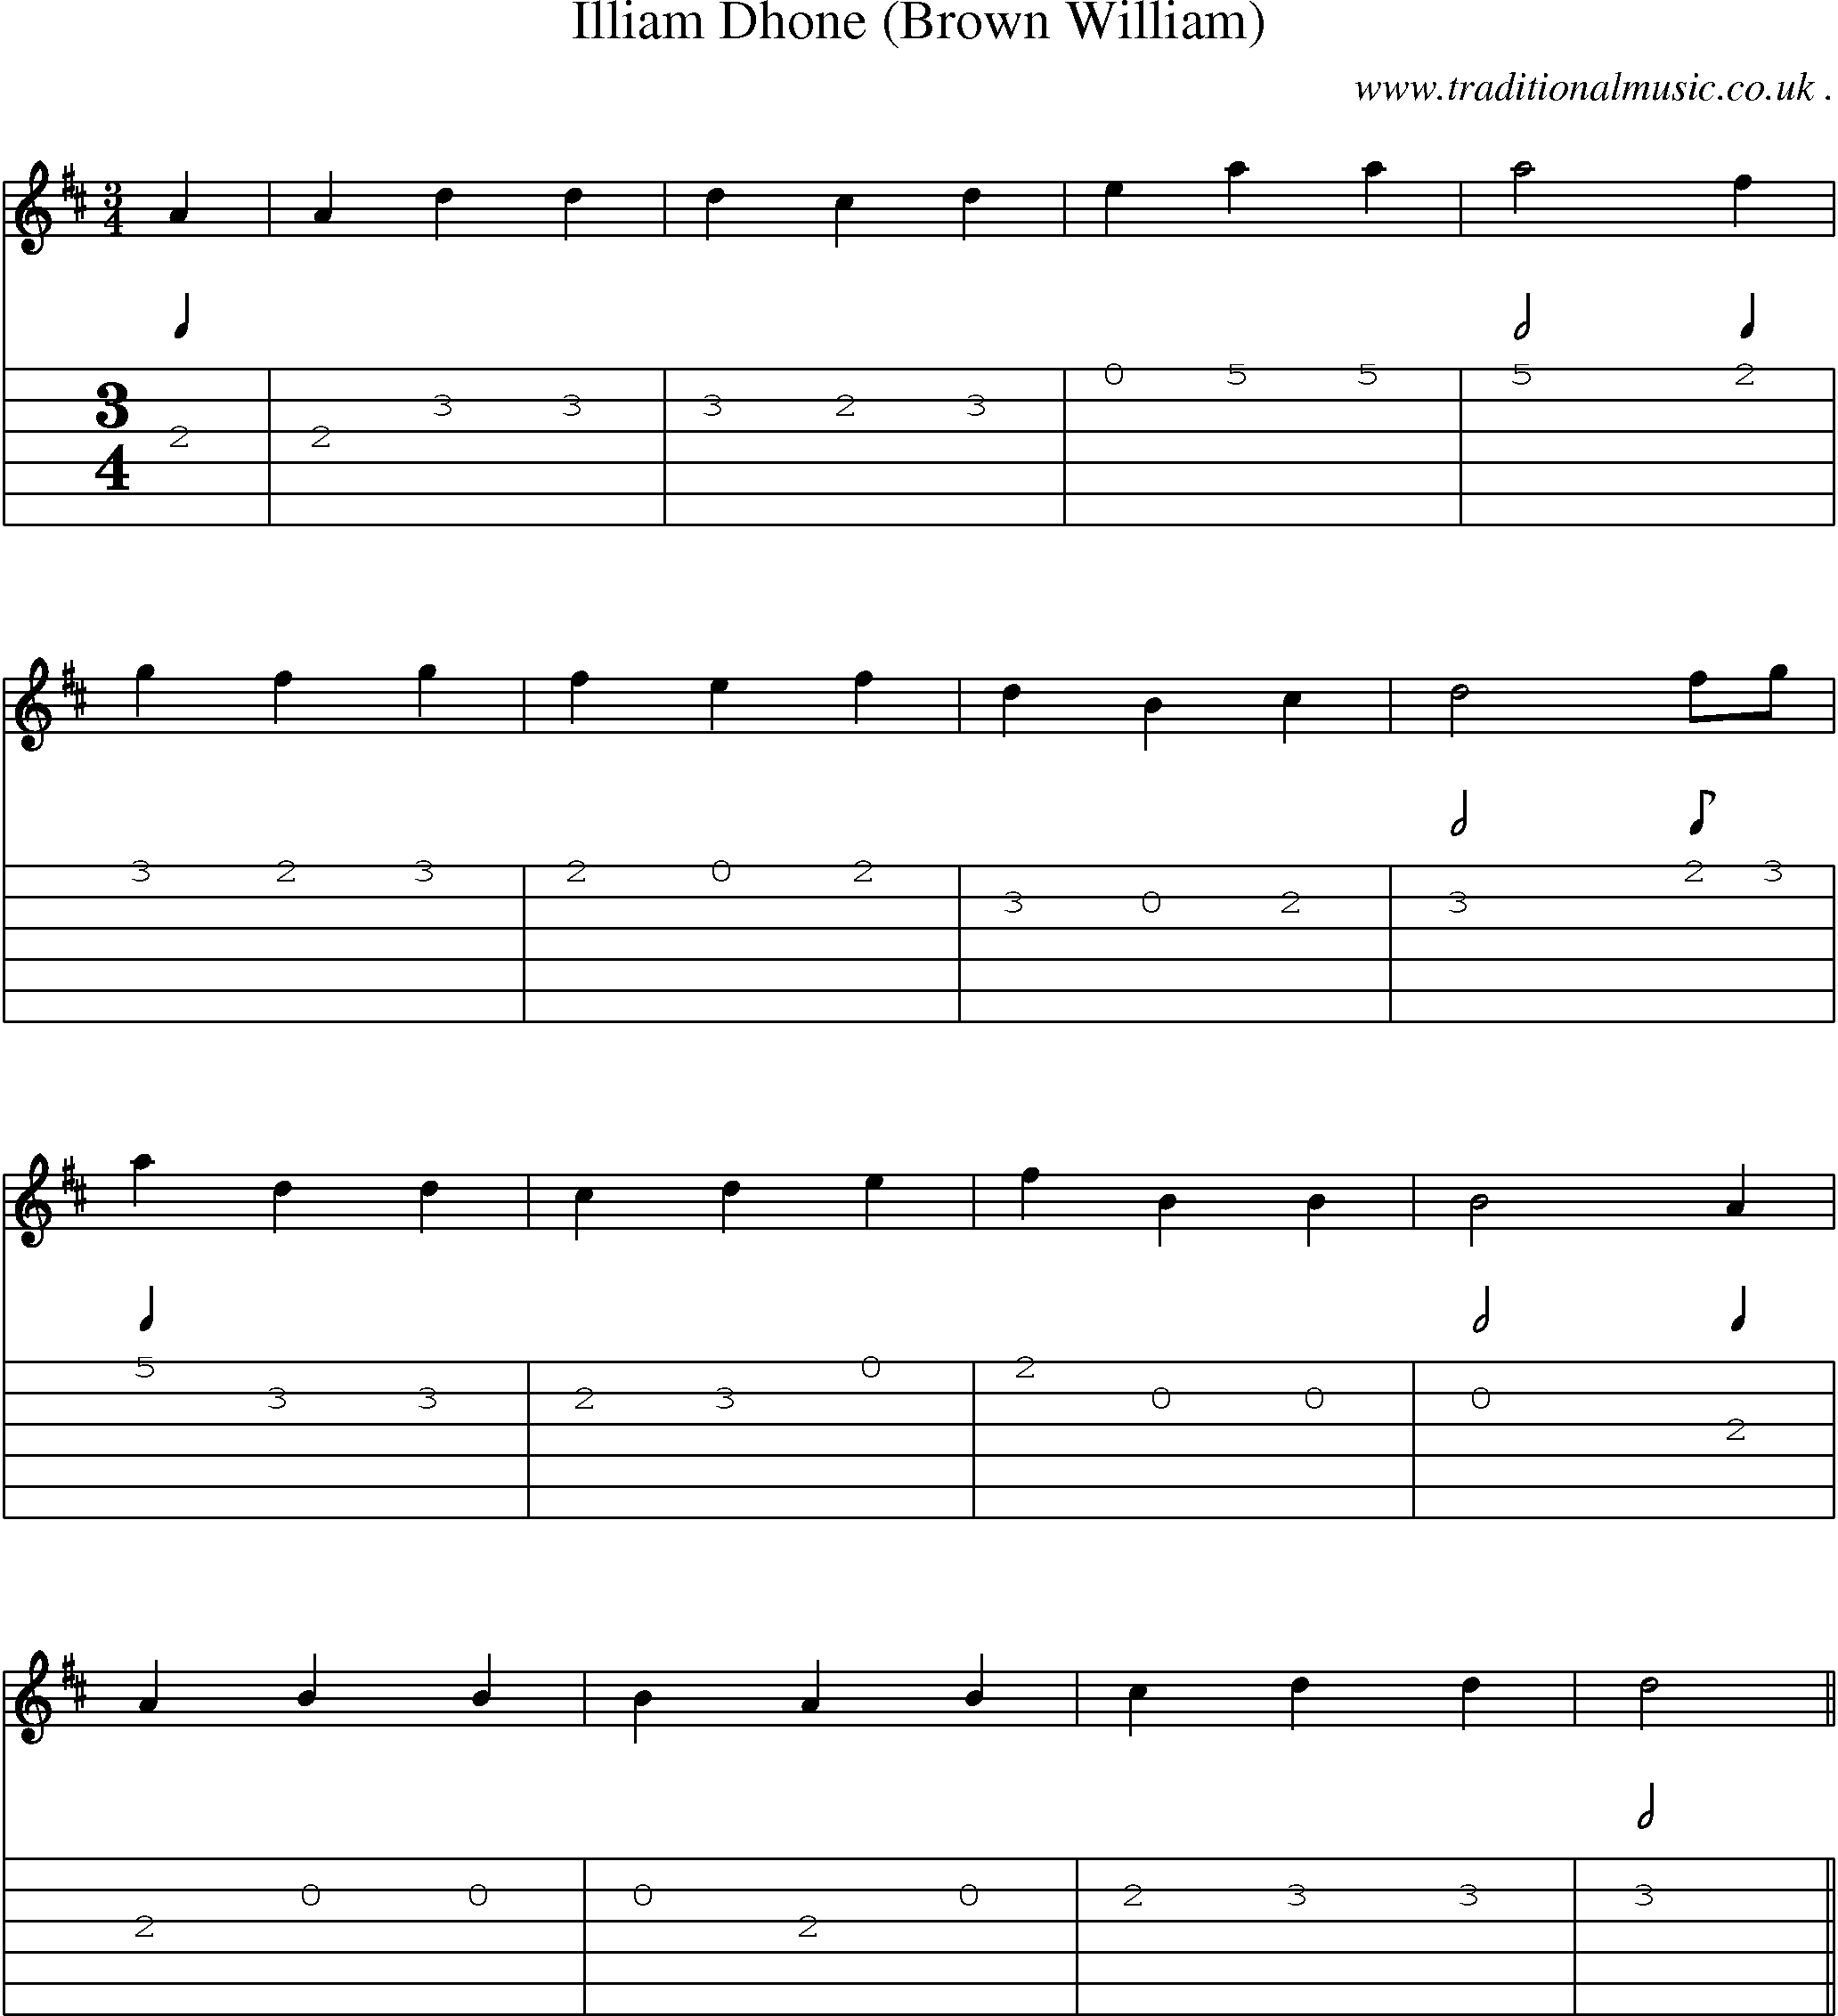 Sheet-Music and Guitar Tabs for Illiam Dhone (brown William)